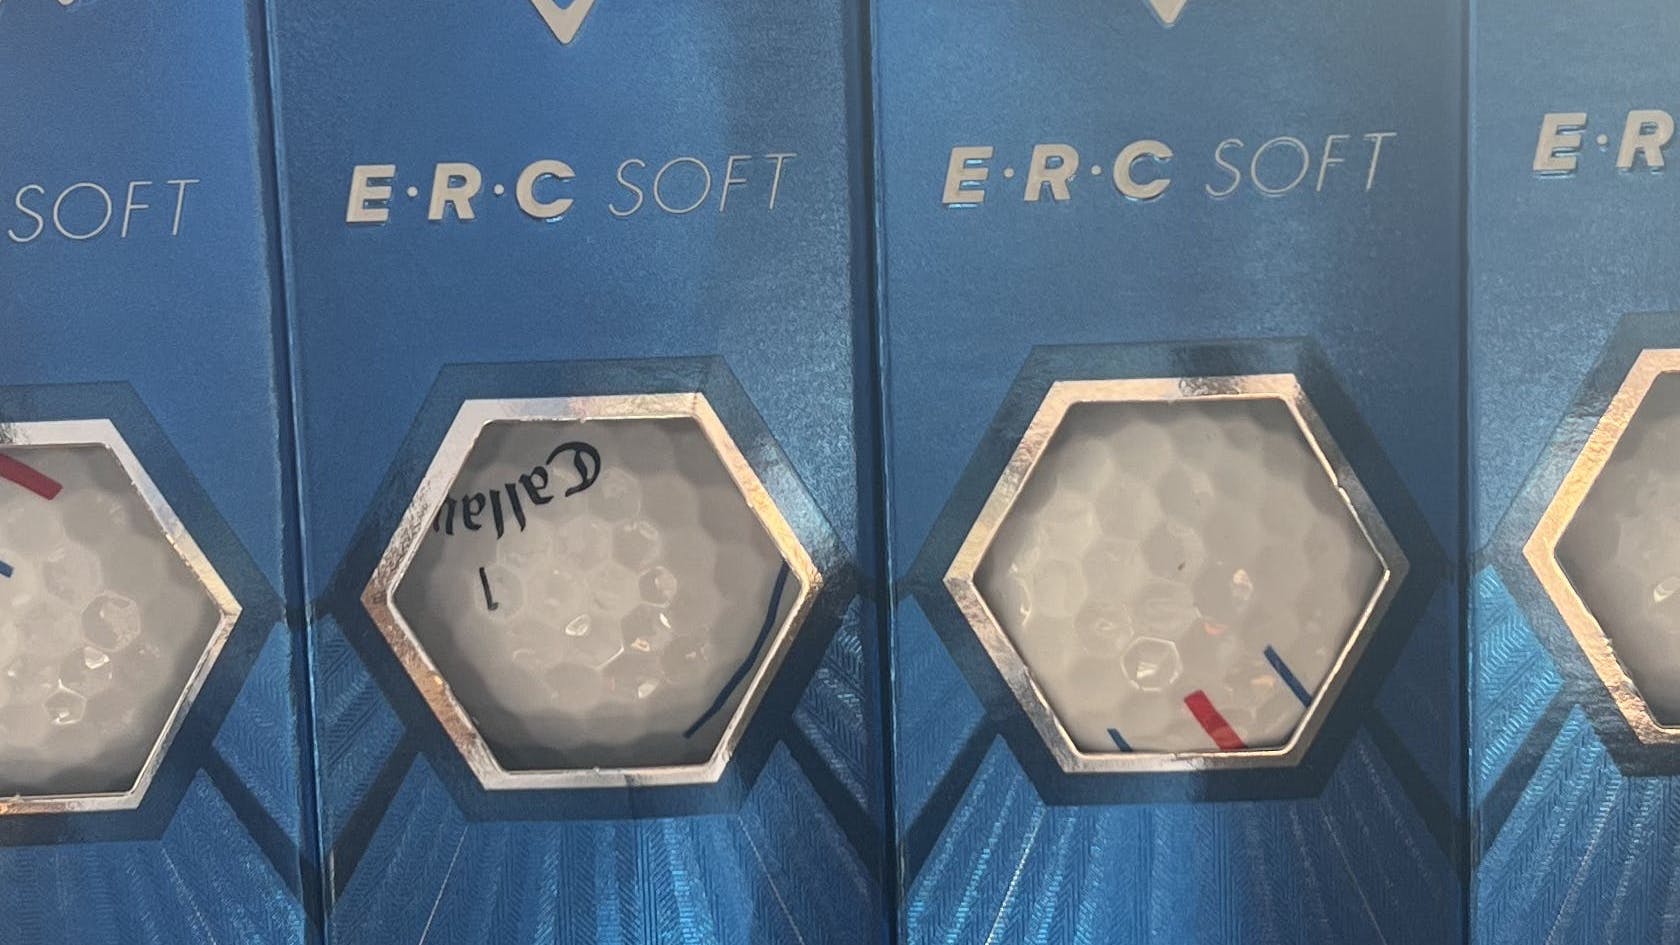 The Callaway 2021 ERC Soft Triple Track Golf Balls in their boxes.